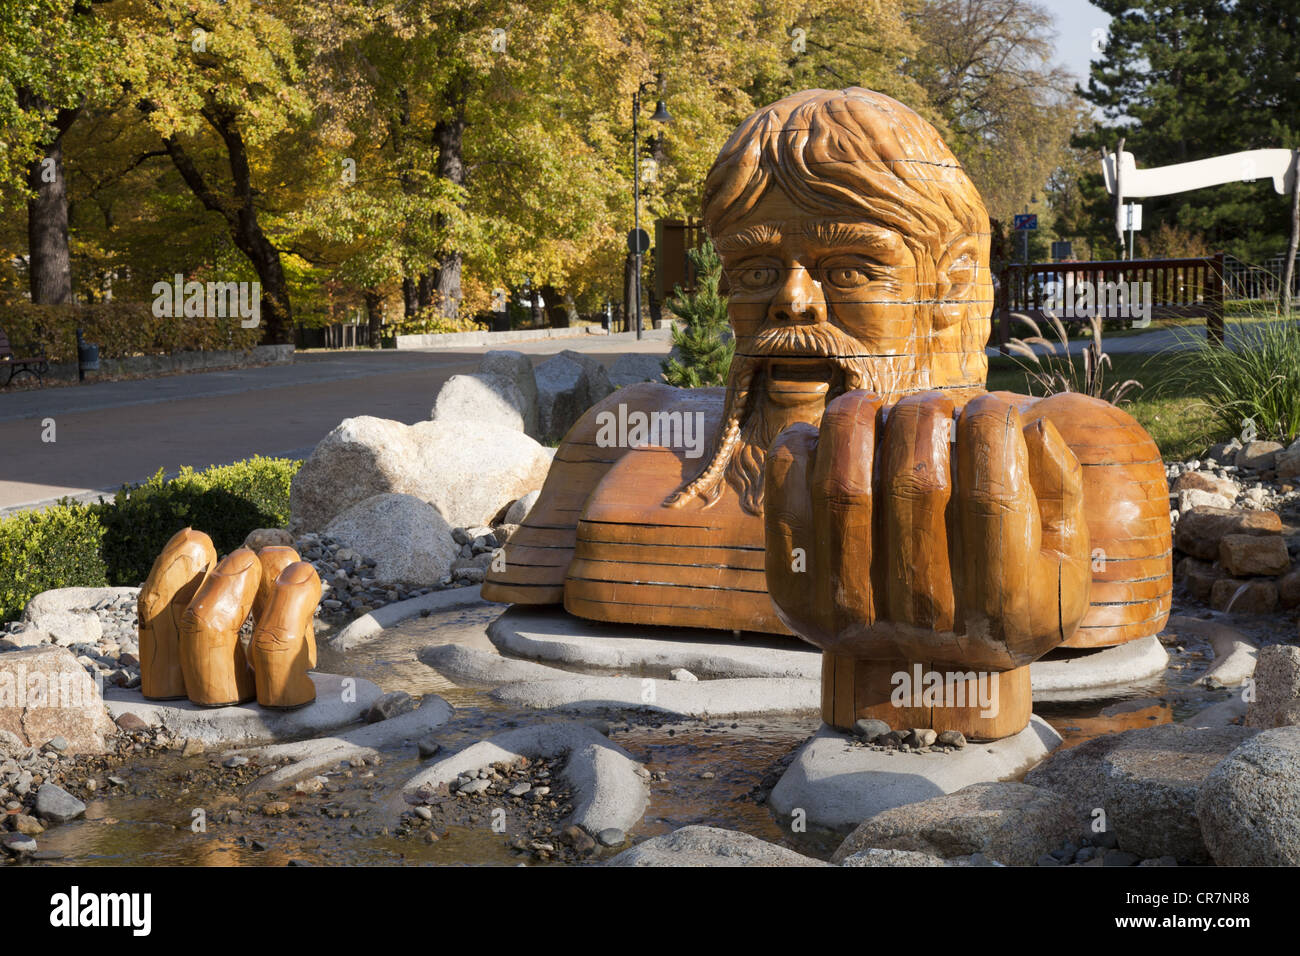 Aegir, Germanic legendary figure, giant of the sea and of the beer, sculpture, Thale, Germany, Stock Photo